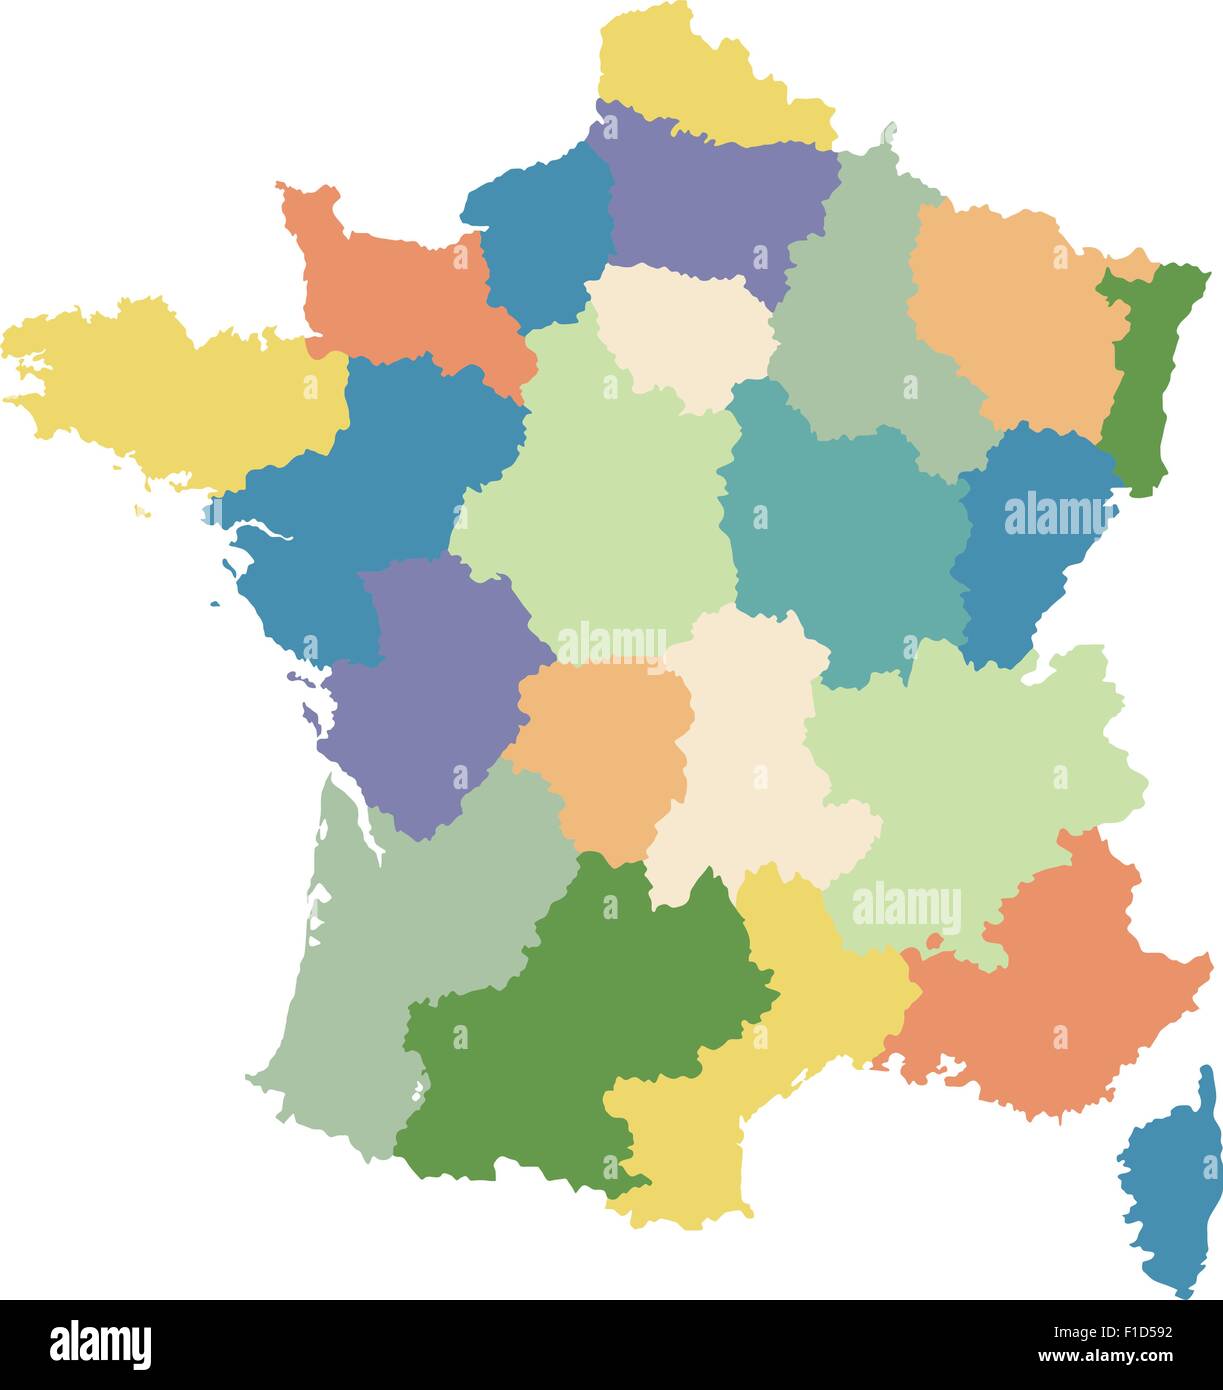 Map of France divided into regions Stock Vector